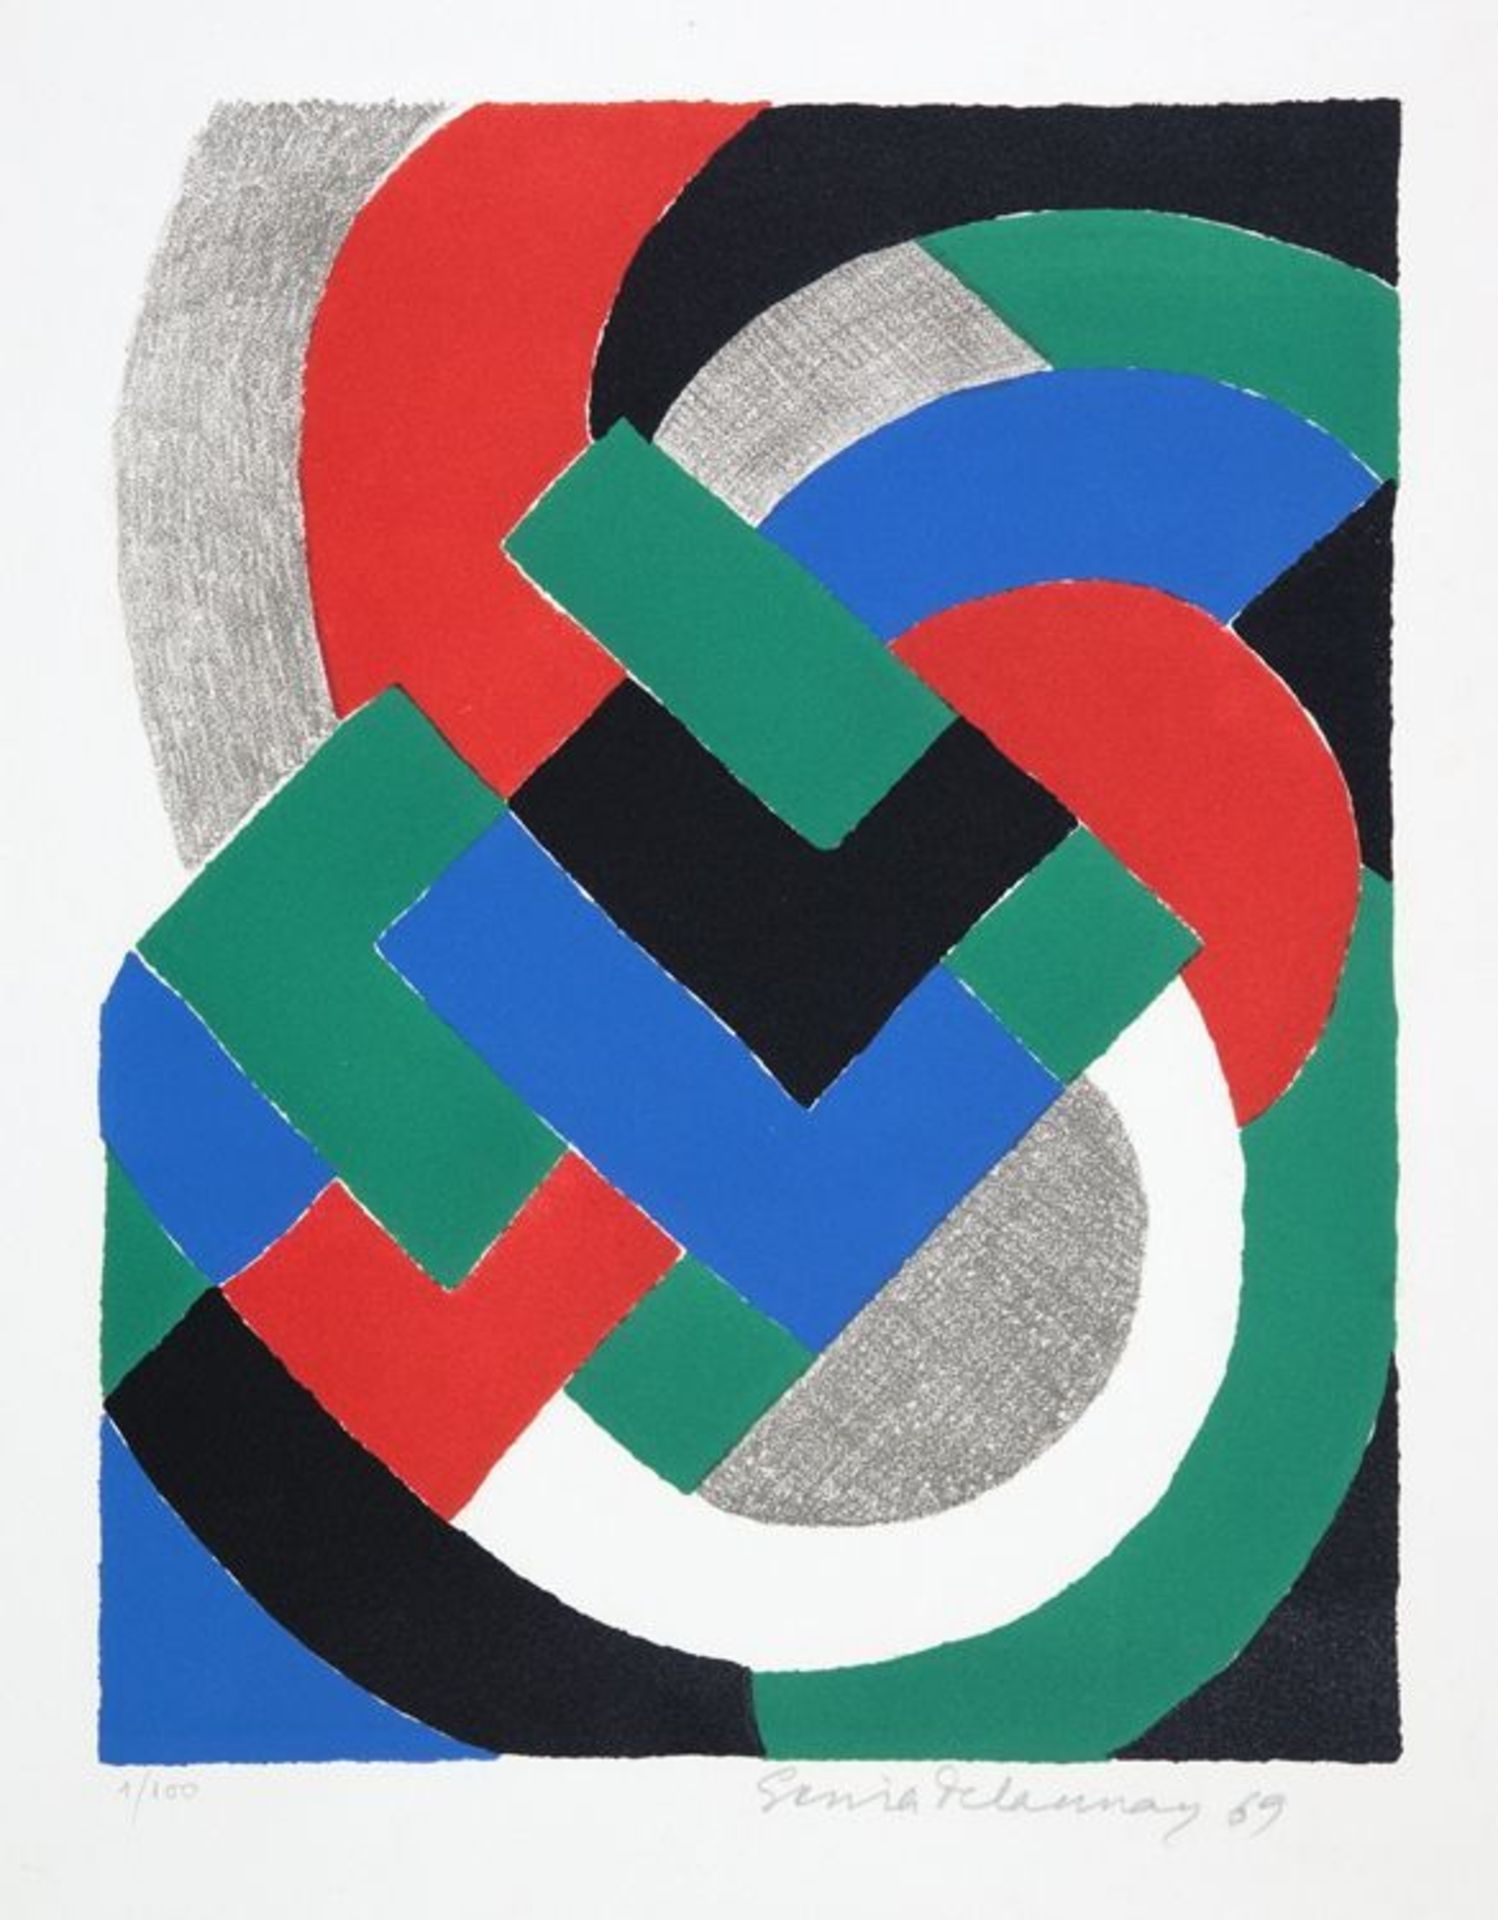 Sonia Delaunay-Terk. Composition. Farblithographie. 1969. 32,3 : 25,3 cm (50,2 : 39,7 cm). Signiert,